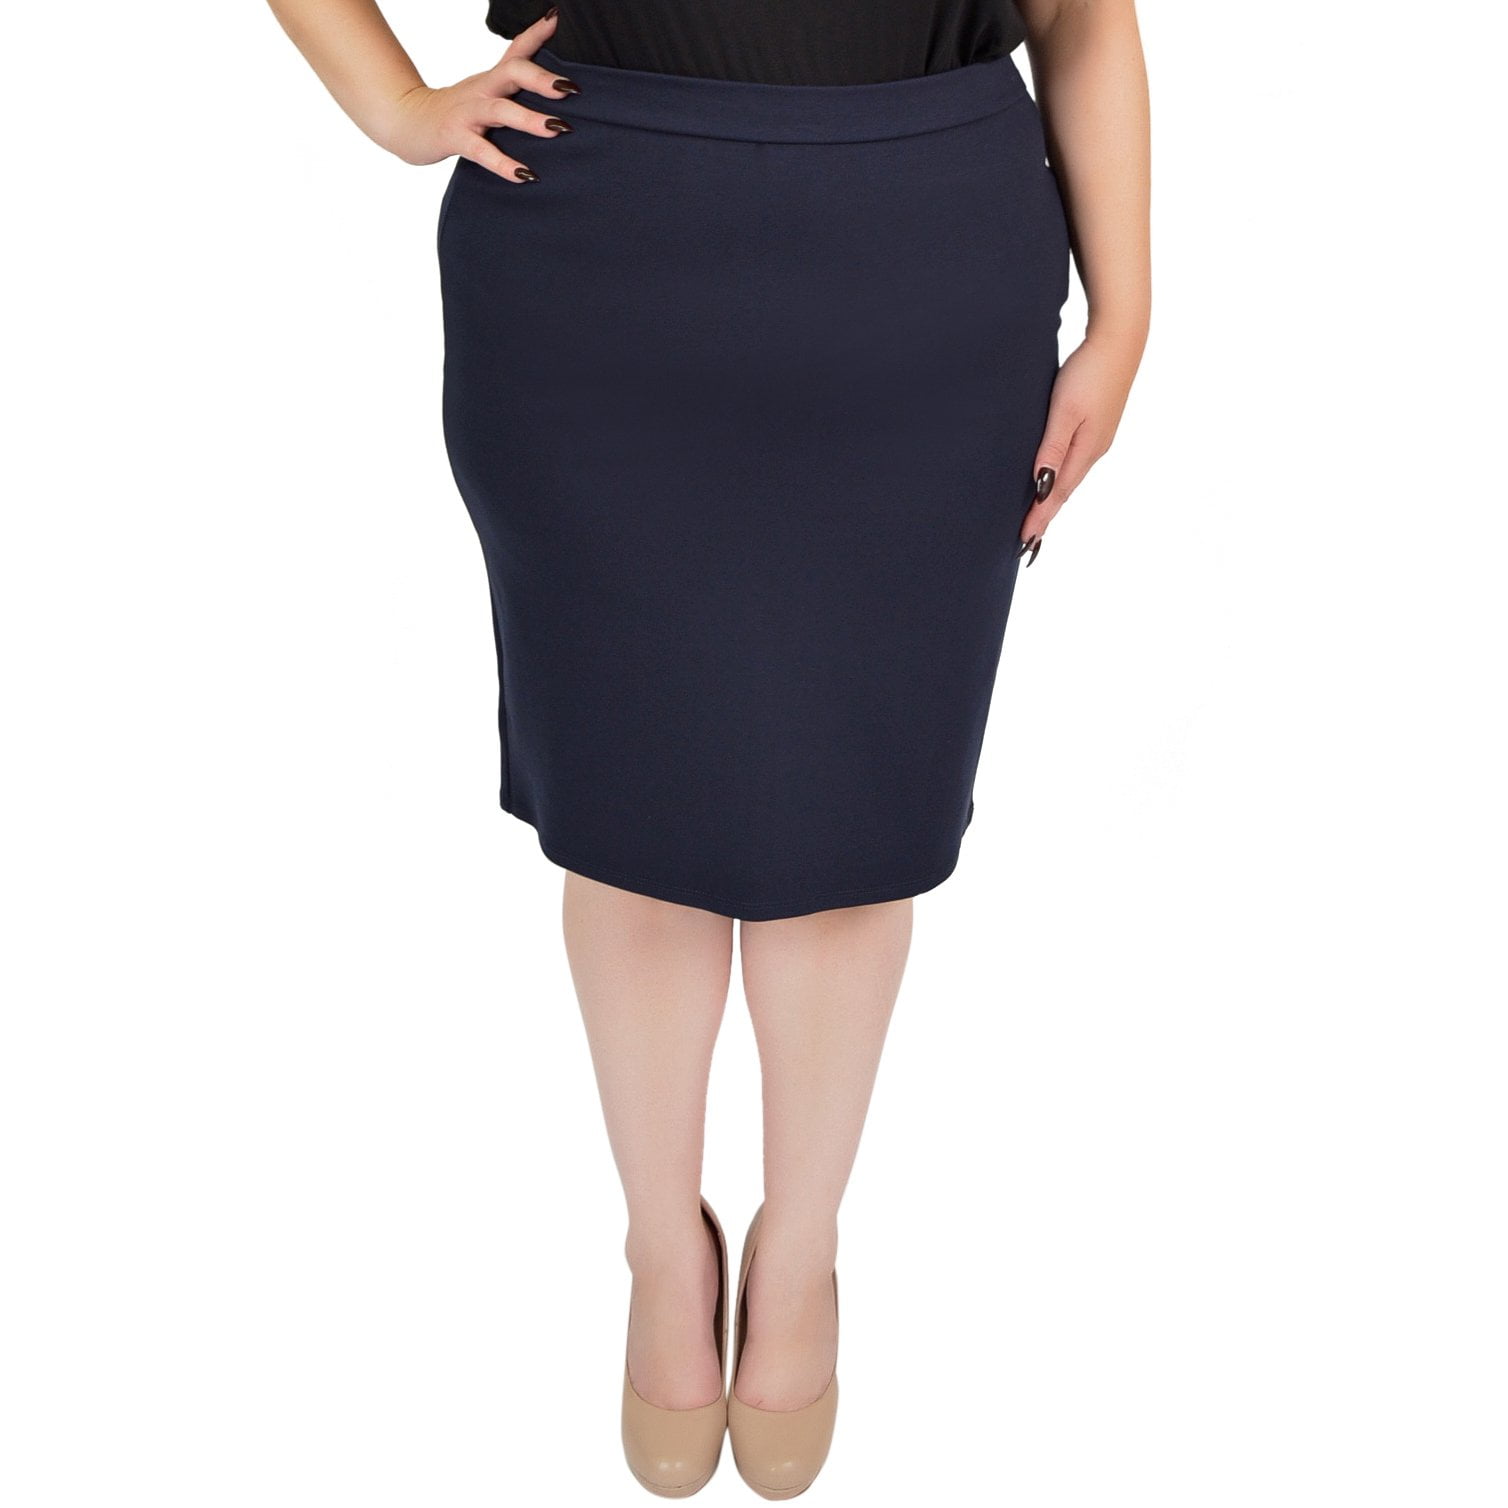 Stretch Is Comfort Plus Size Bodycon Knee Length Back Slit Fitted Skirt 2x 16 18 Navy